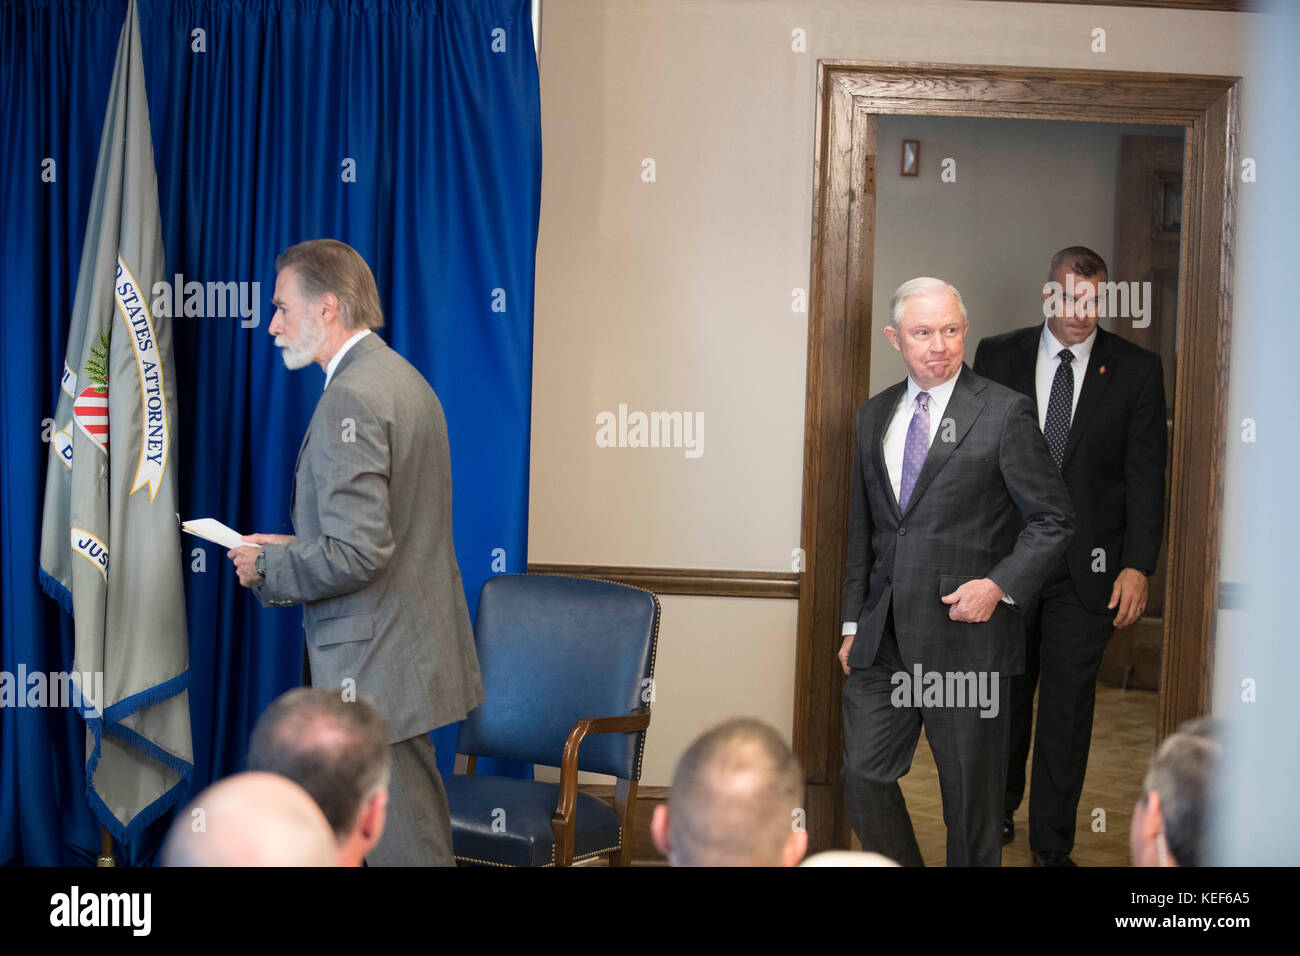 Austin, USA. 20th Oct, 2017. U.S. Attorney General Jeff Sessions (dark suit), accompanied by U.S. Attorney for the Western District of Texas, Richard Durbin, Jr.(gray suit), visits with U.S. attorneys to discuss the Trump administration's immigration policy in Austin, Texas. Sessions was met by a few dozen protesters but no incidents were reported. Credit: Bob Daemmrich/Alamy Live News Stock Photo